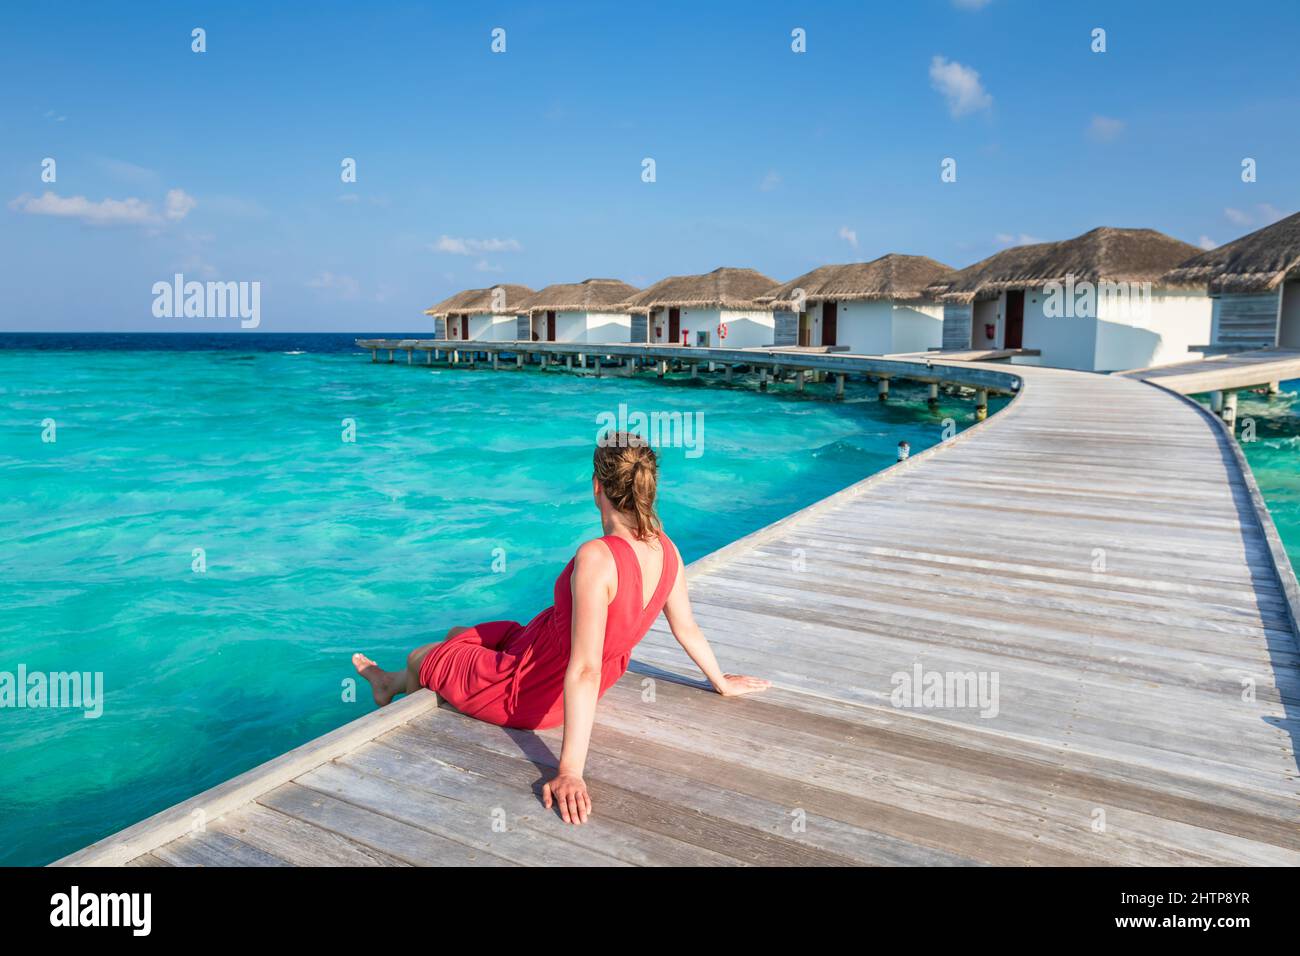 Beach vacation holidays with woman relaxing on wooden pier at